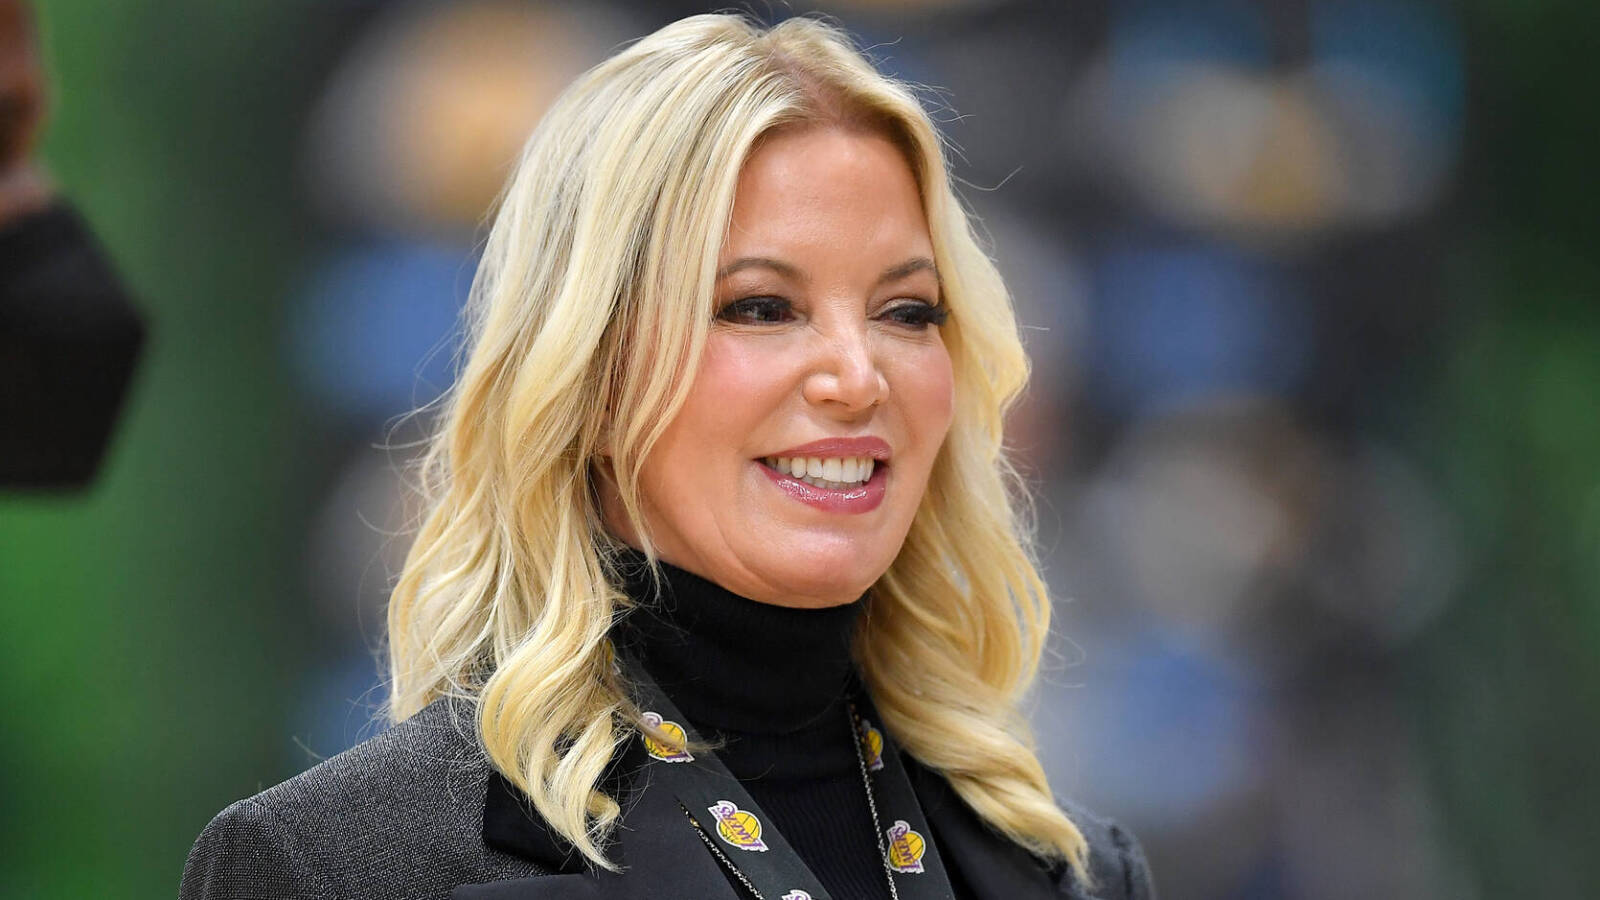 Lakers owner Jeanie Buss gets engaged to longtime boyfriend